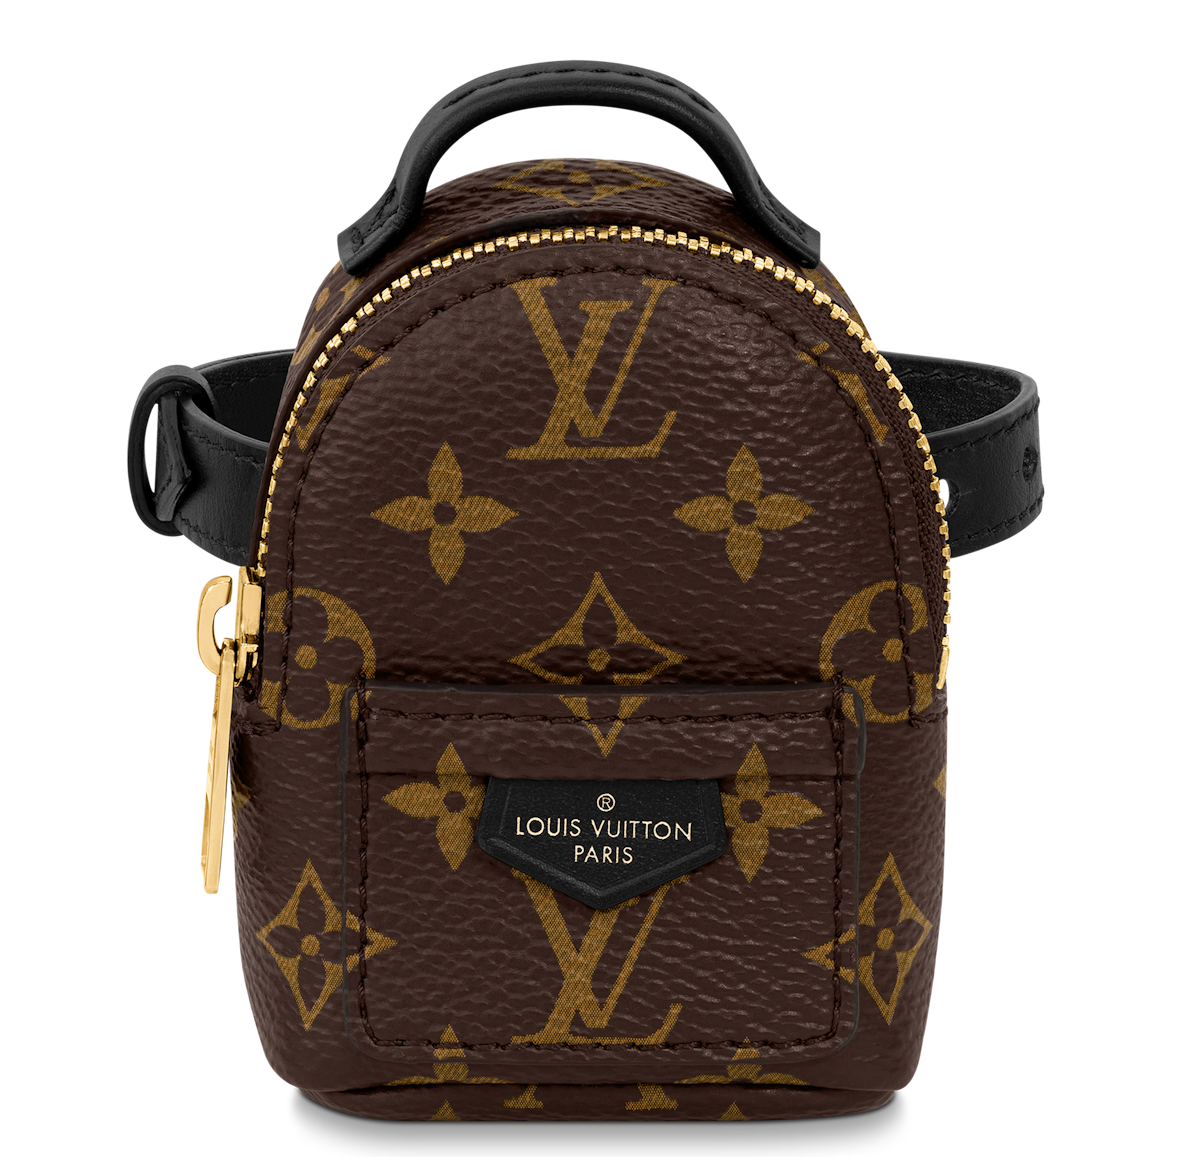 Backpack classic Flower French Louis Vuitton LV India